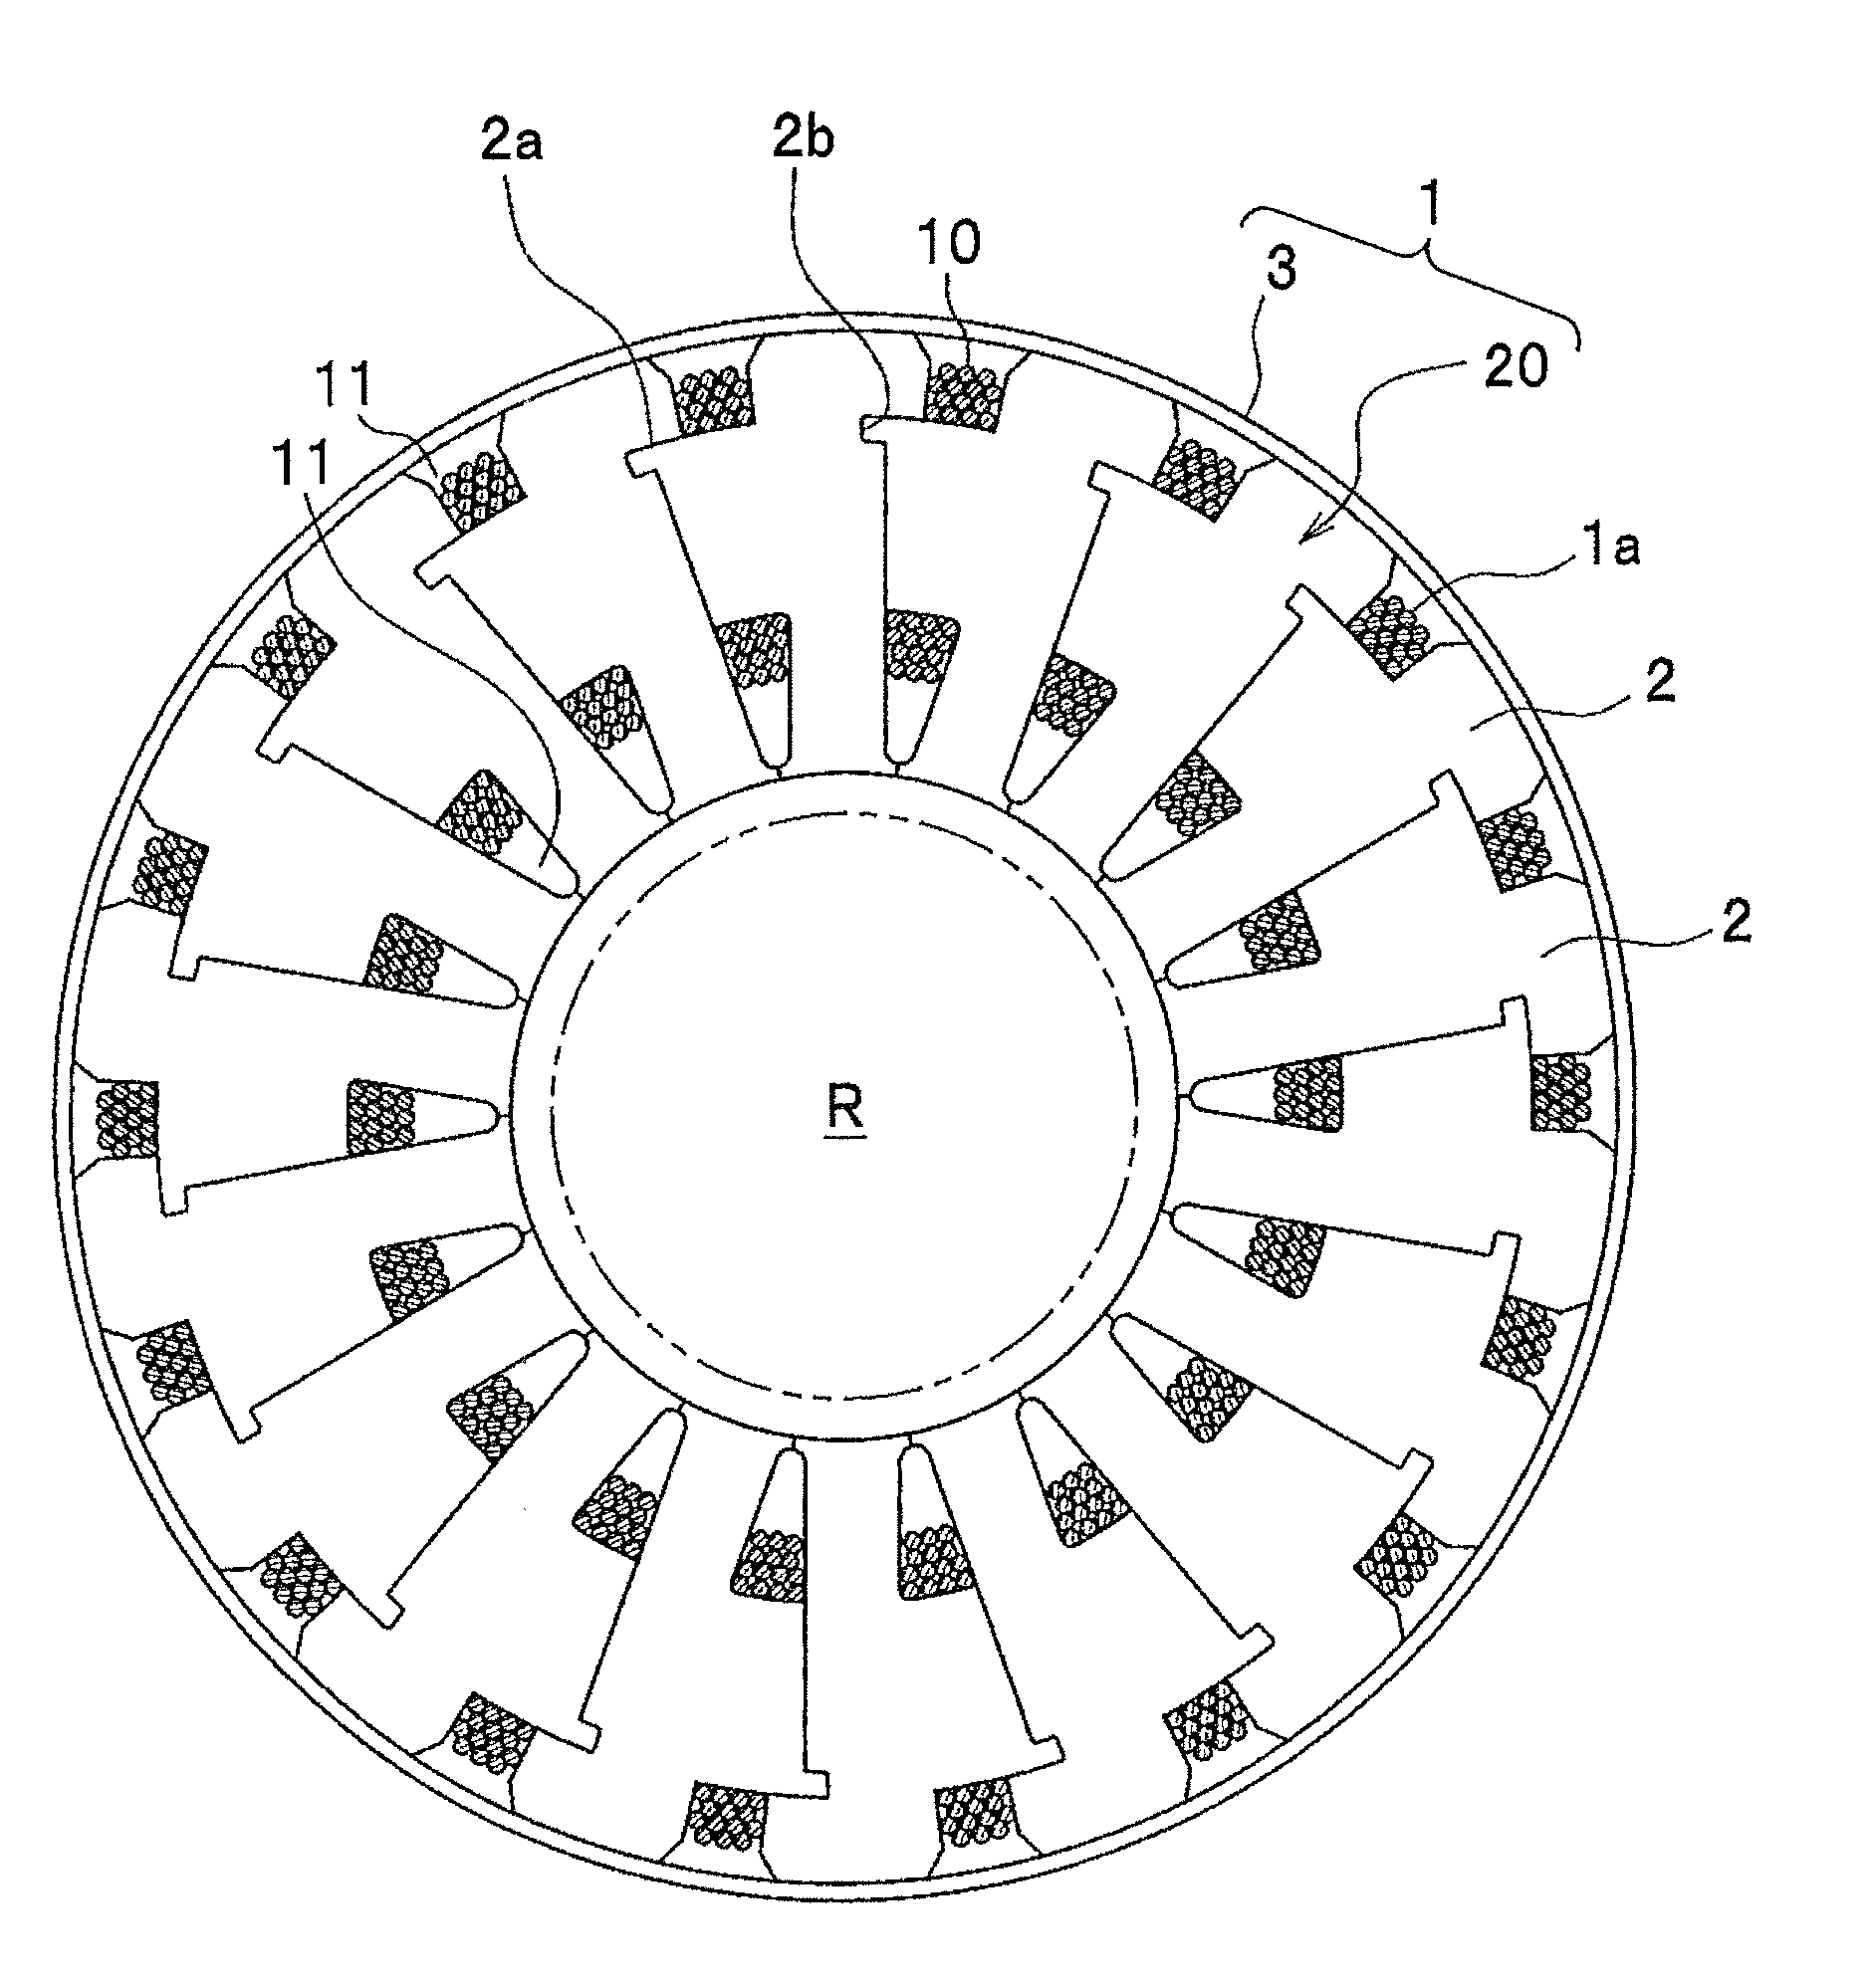 Stator for electrical rotating machine